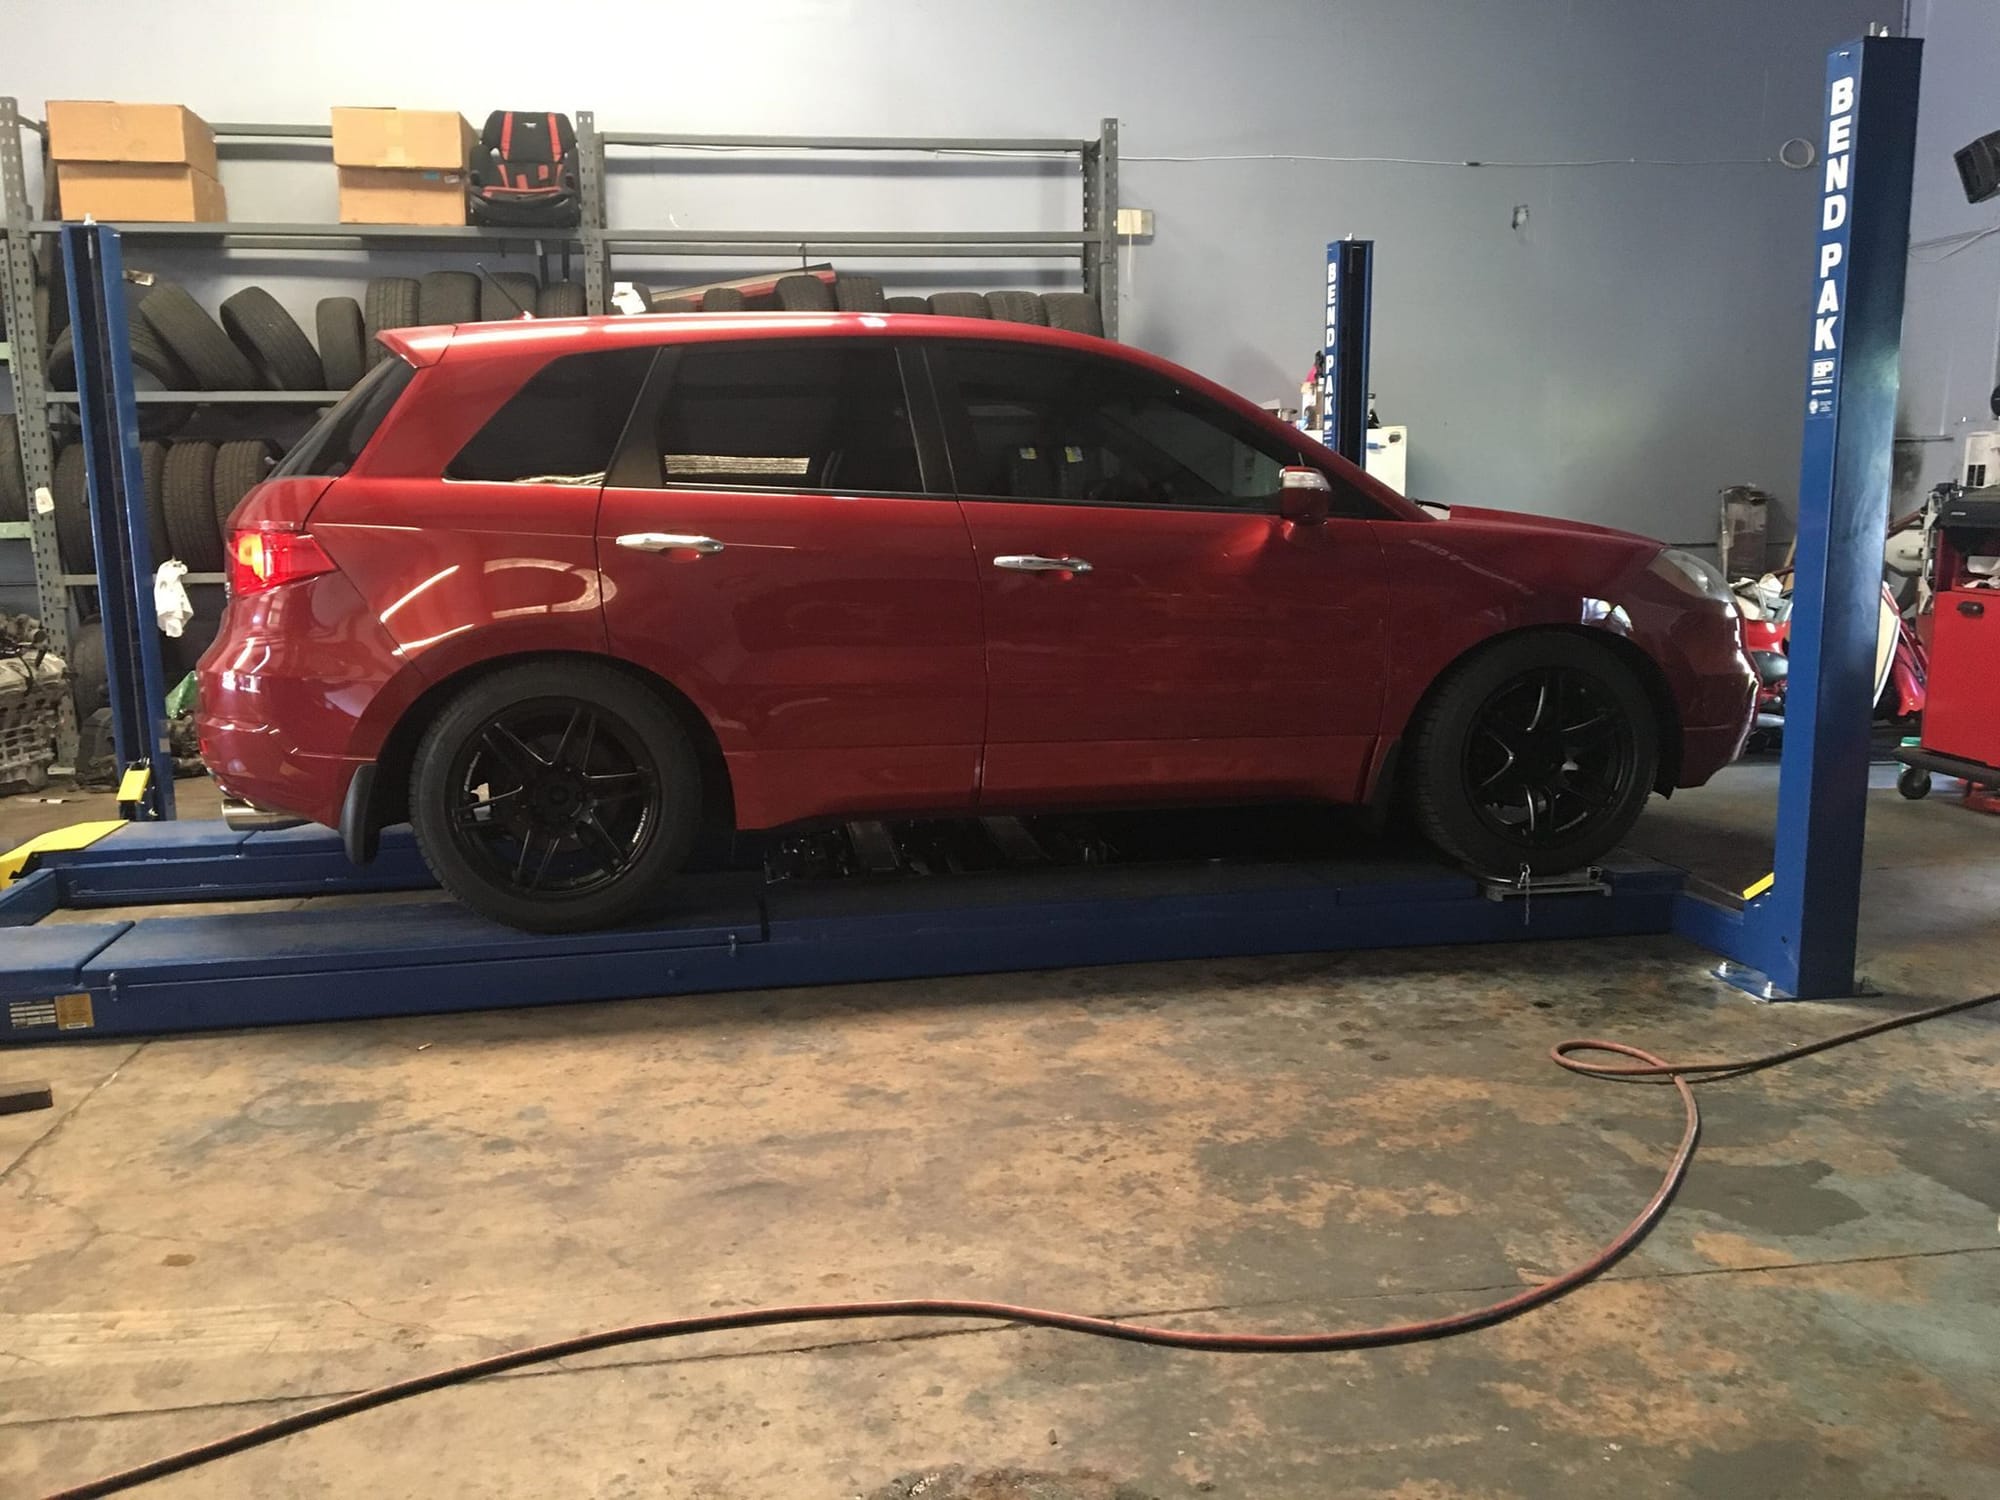 Wheels and Tires/Axles - FS: WedsSport SA-60M wheels - Used - 2007 to 2012 Acura RDX - St. Ptersburg, FL 33716, United States